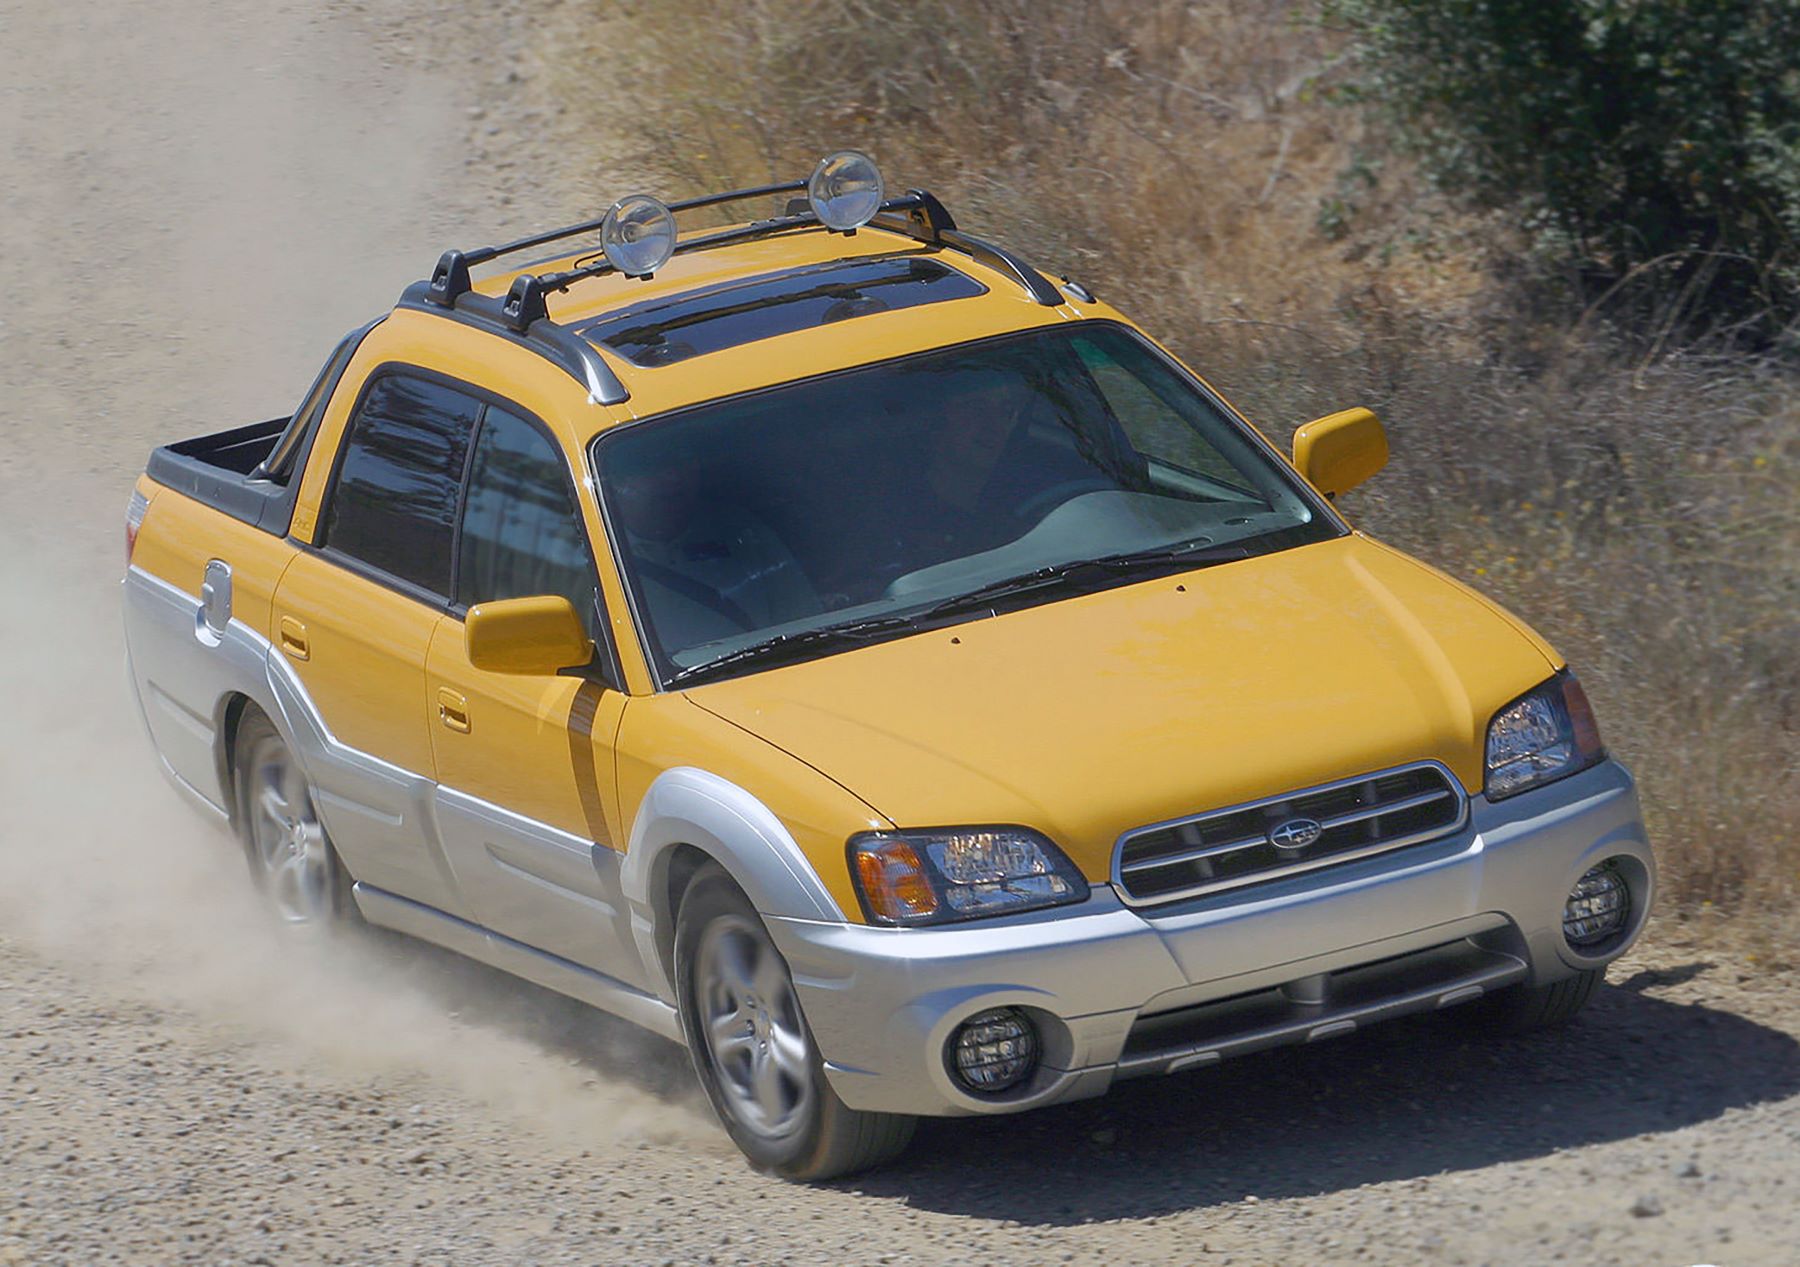 A yellow Subaru Baja compact utility pickup truck built with a midgate driving on a dusty gravel road